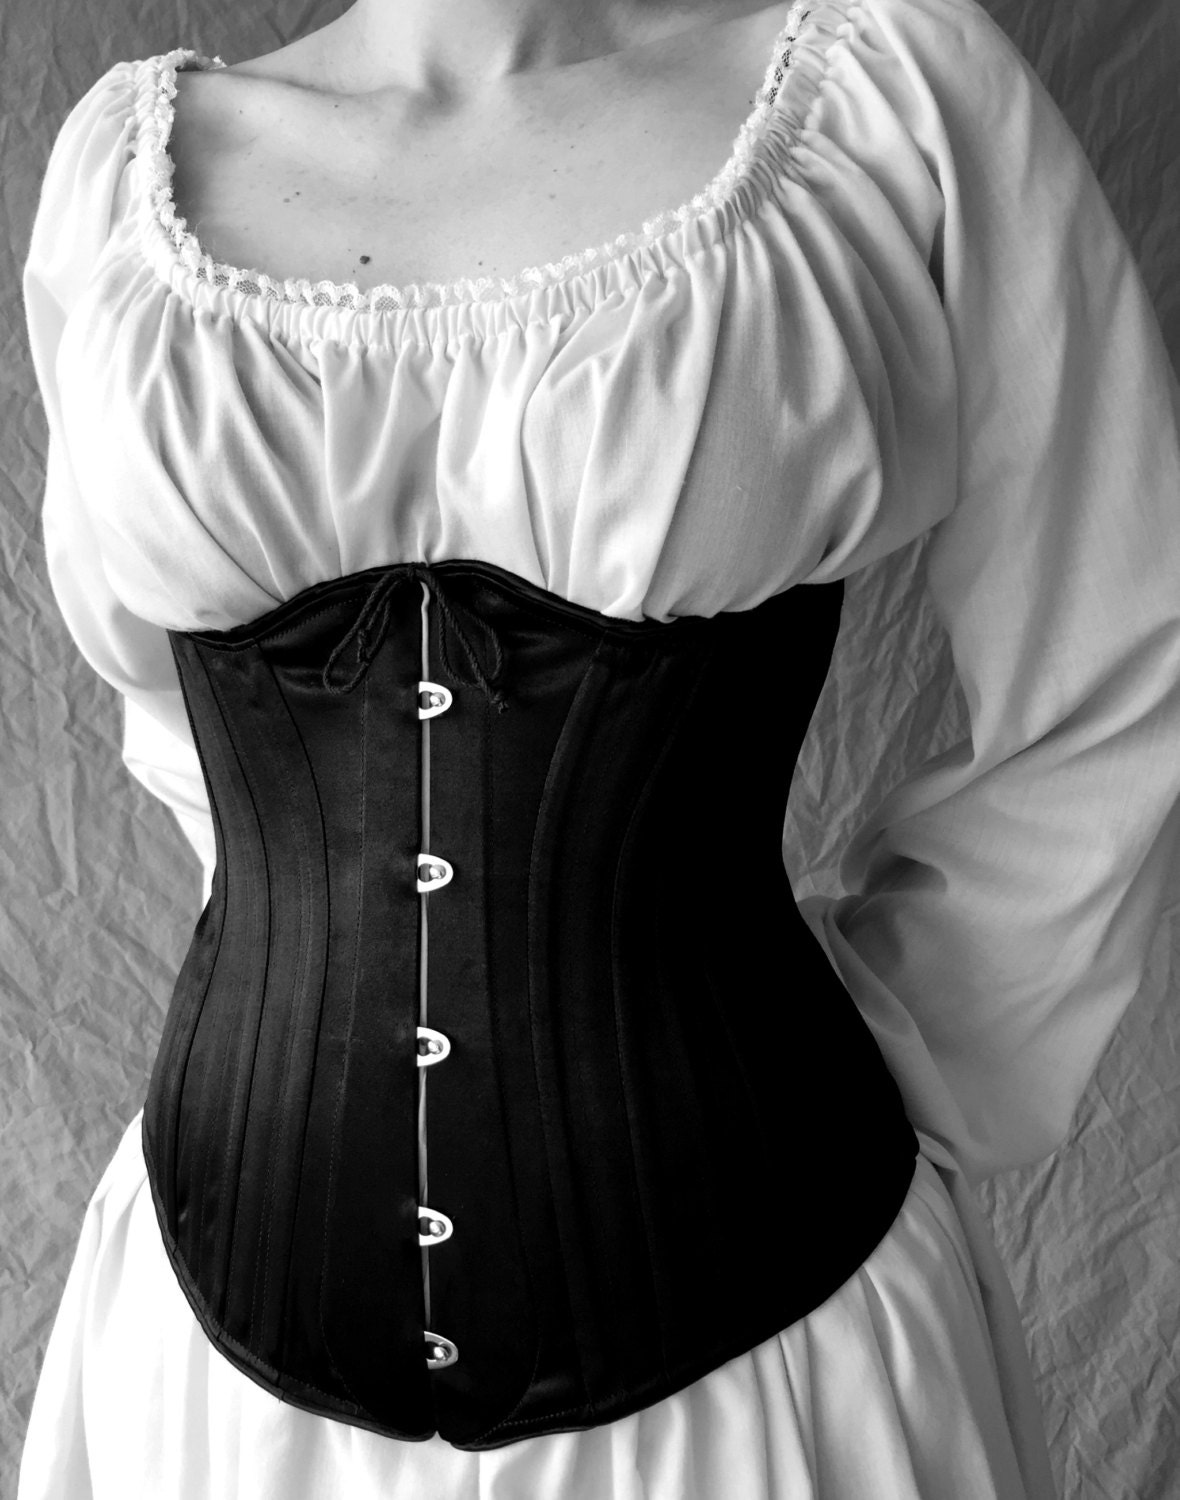 Underbust Victorian Corset C. 1880 Steel Boned Historical Hourglass With  Busk Waspie Brocade Satin or Cotton Coutil, Made to Measure -  Canada